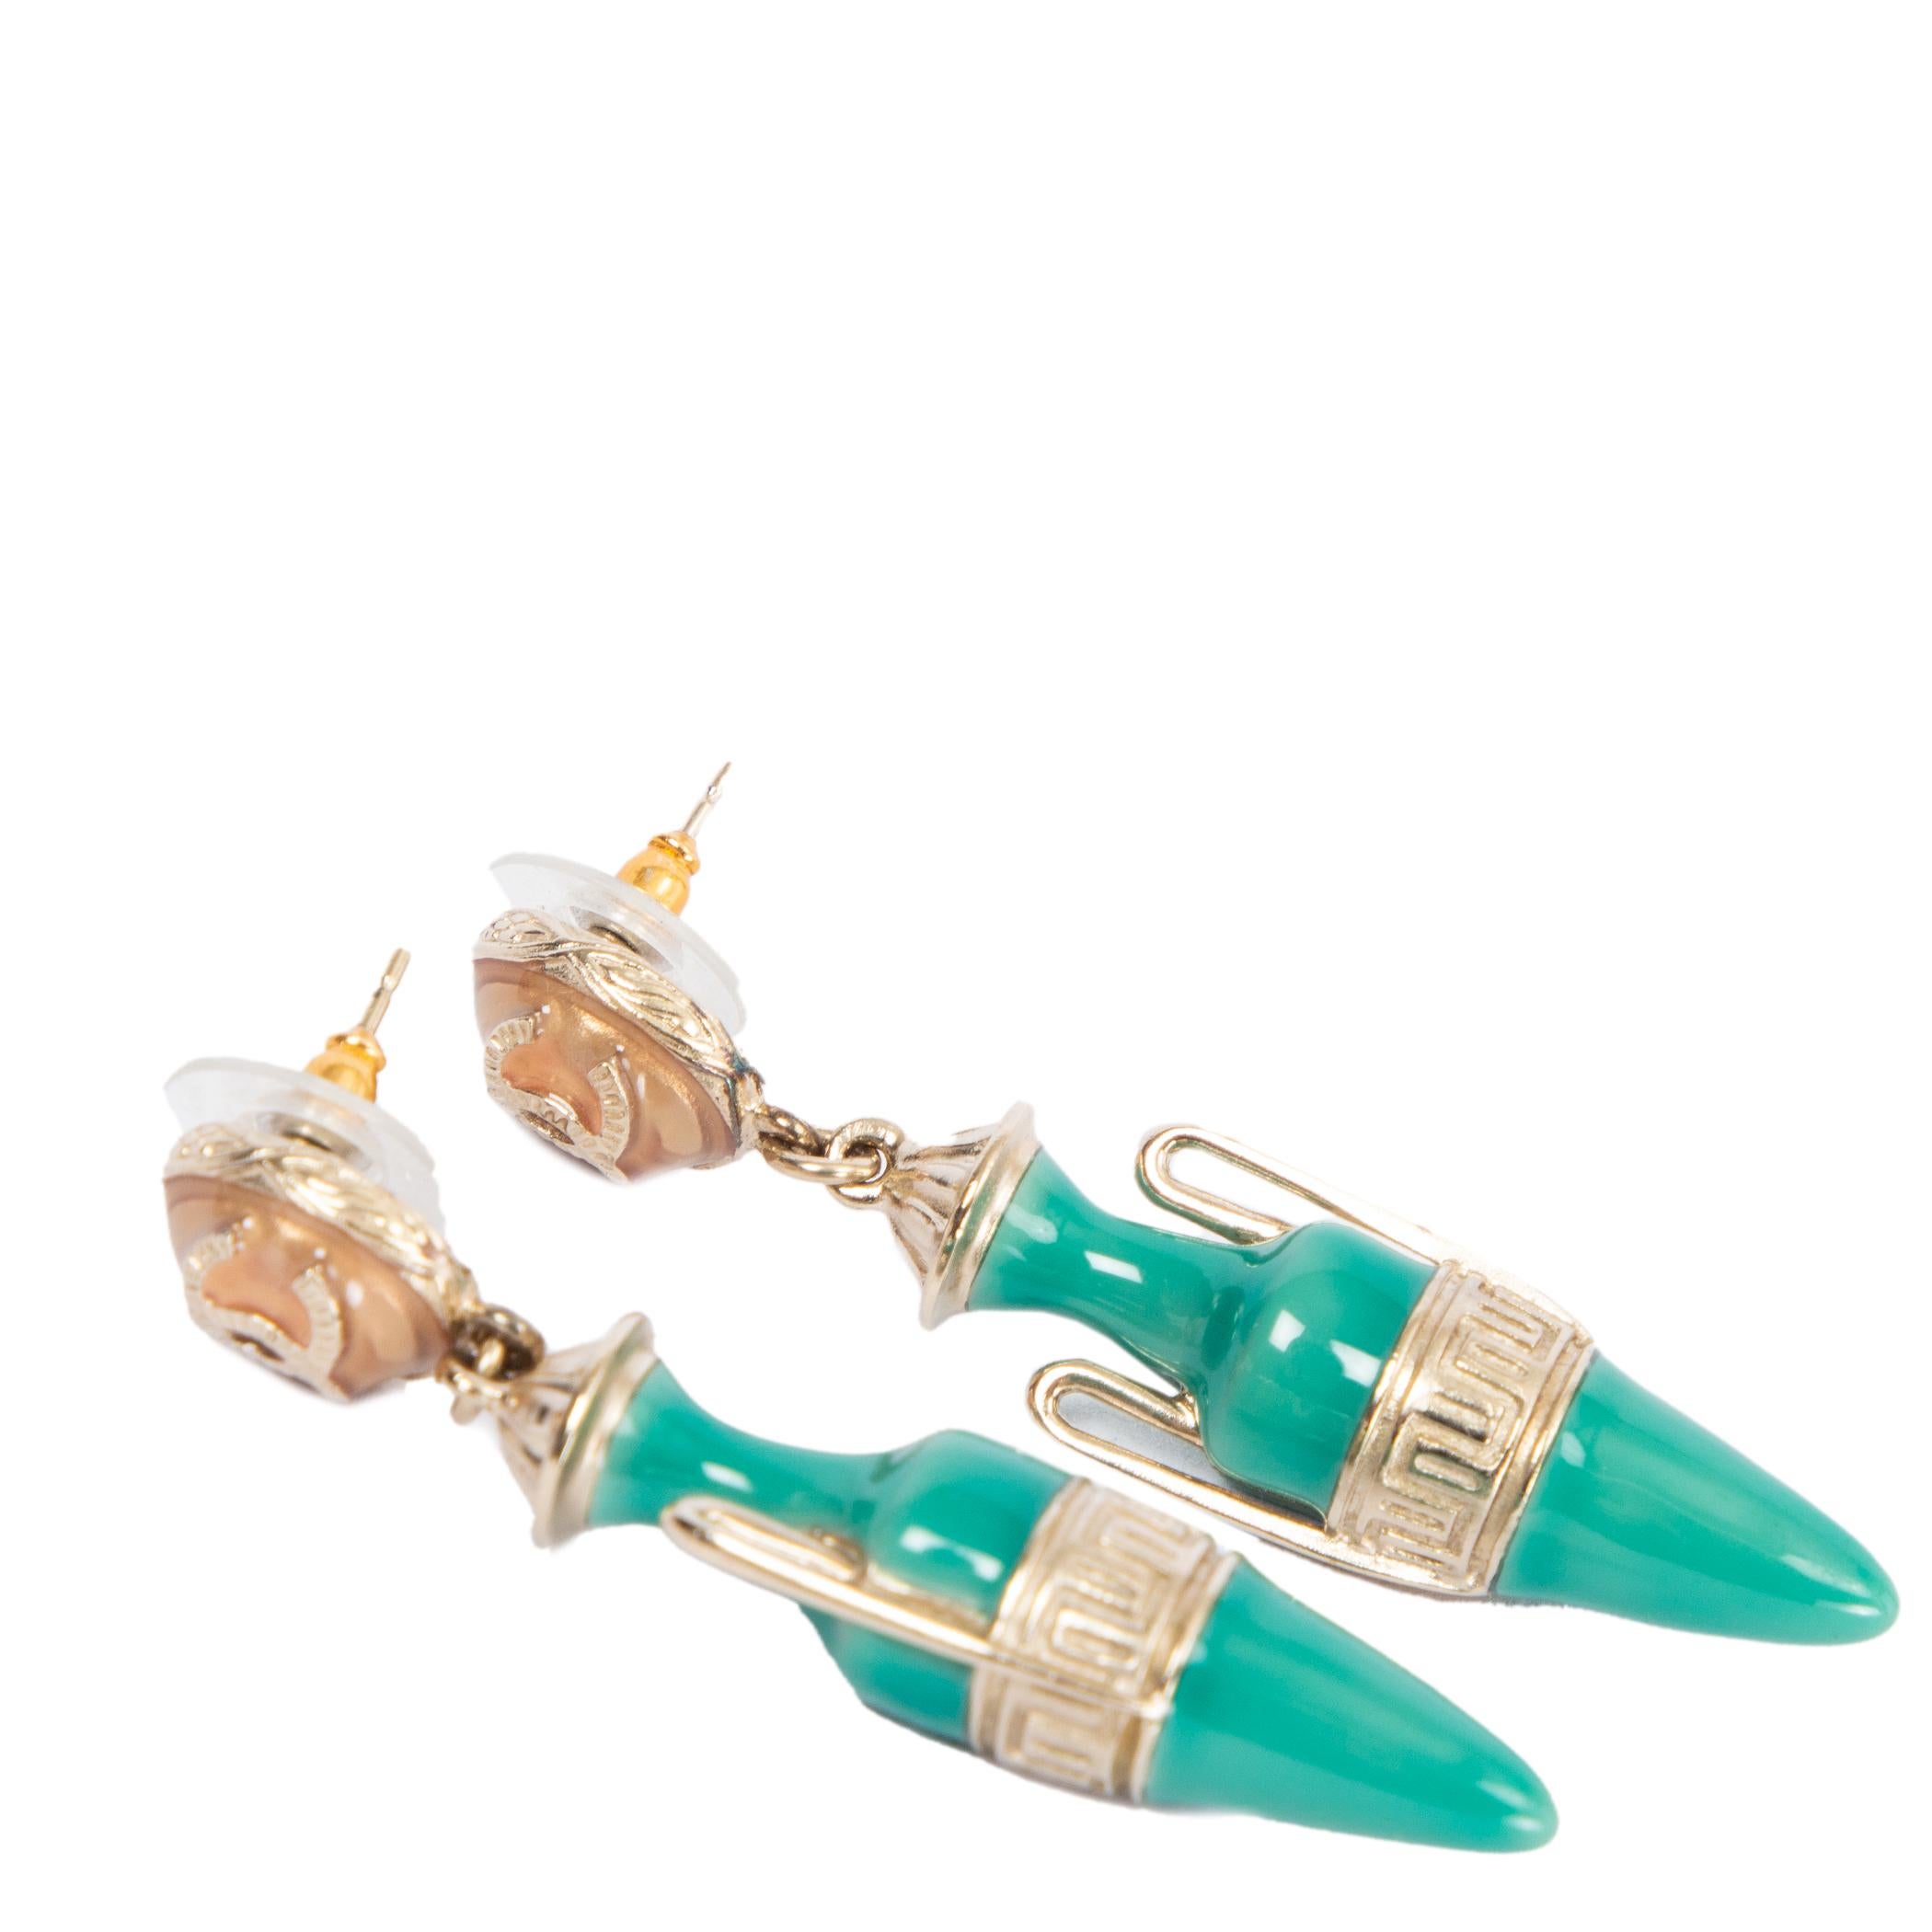 100% authentic Chanel 2018 CC drop earrings made from enamel and metal in turquoise green and light gold-tone hues, these drop earrings from Chanel boast an oversized pendant and are finished with the maison's signature interlocking CC logo for a